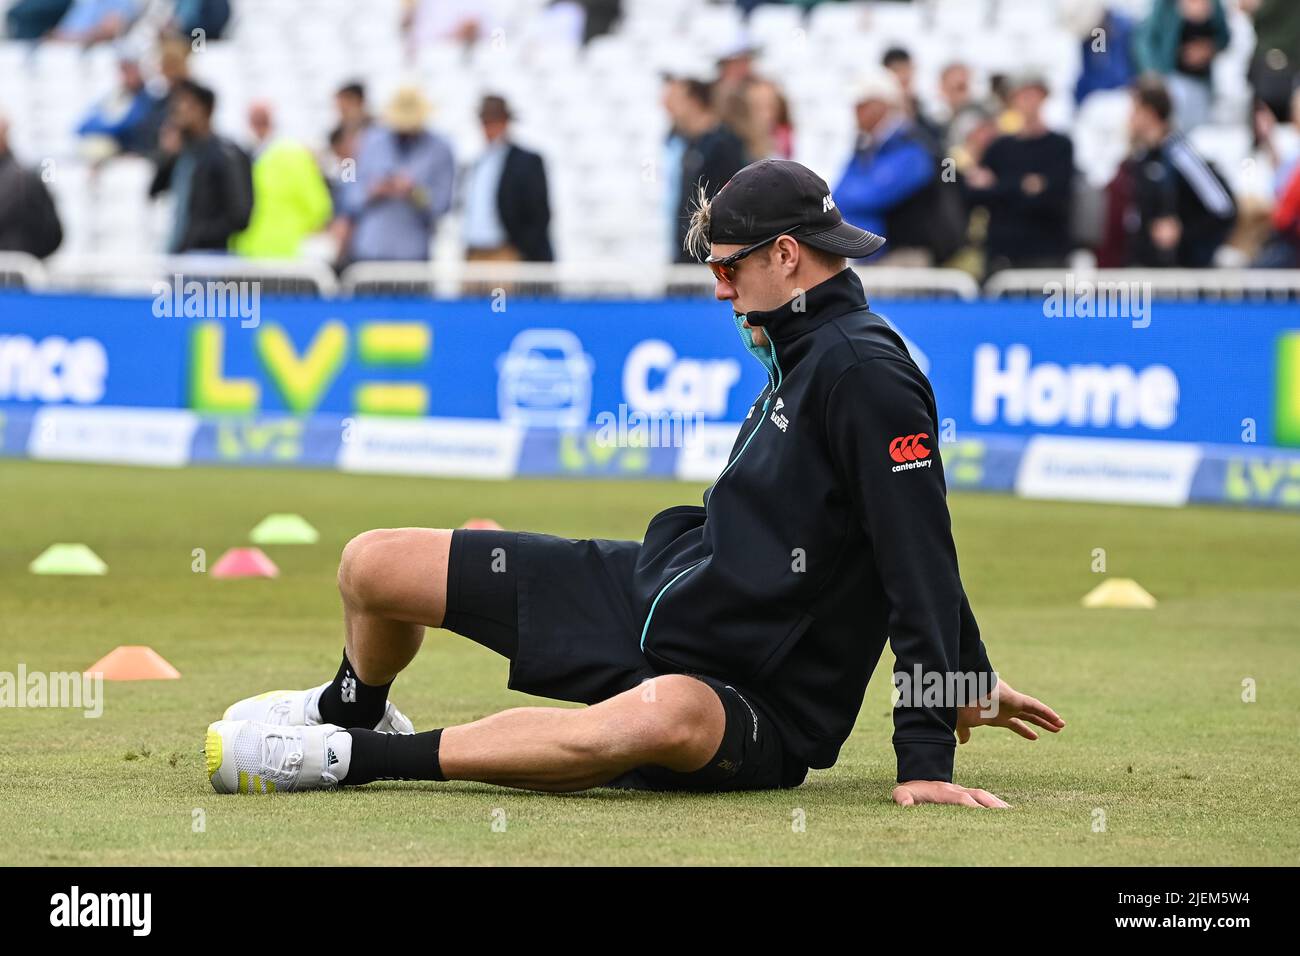 Kyle Jamieson of New Zealand stretching during day 2 of the 2nd Test between the New Zealand Blackcaps and England at Trent Bridge Cricket Ground, Nottingham, England on Saturday 11 June 2022. Stock Photo